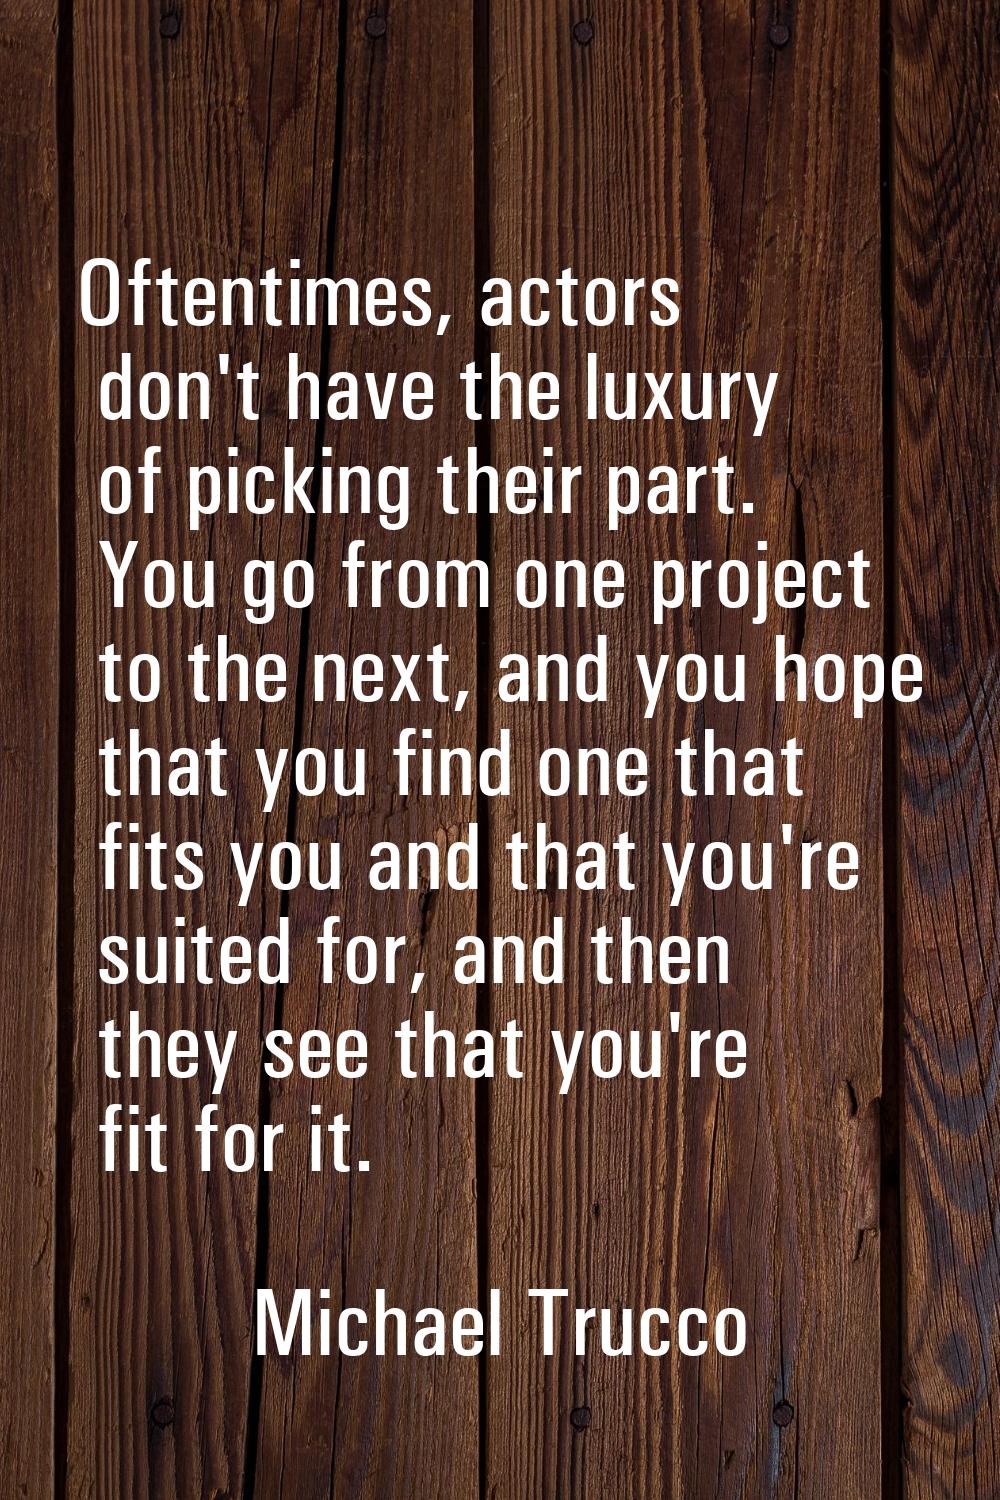 Oftentimes, actors don't have the luxury of picking their part. You go from one project to the next